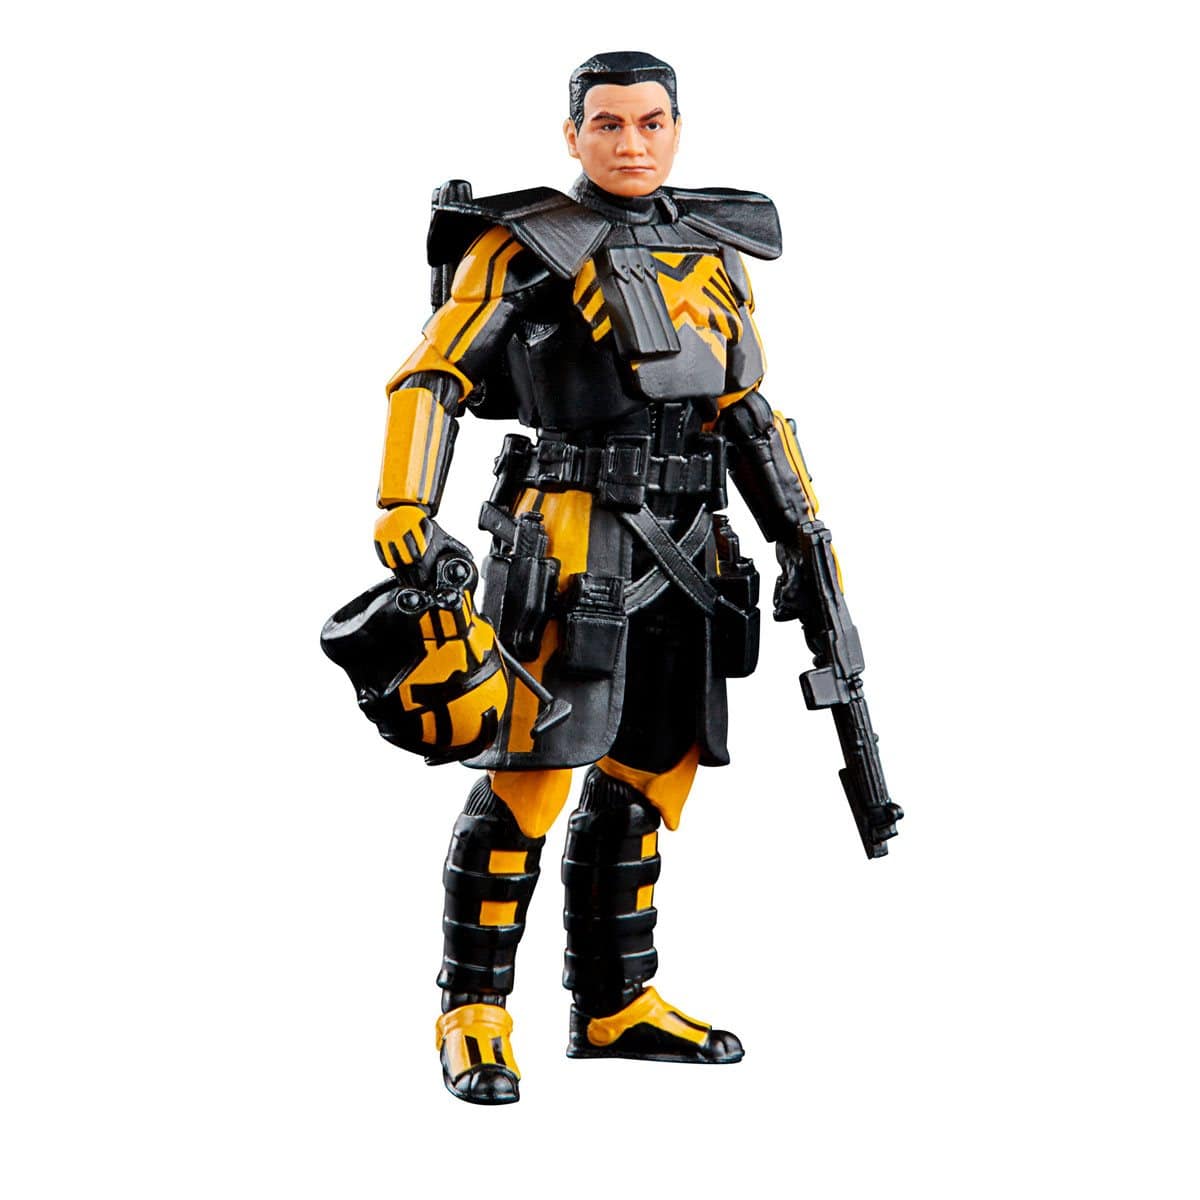 Star Wars Umbra Operative ARC Trooper - The Vintage Collection 3 3/4" scale figure - EE Exclusive - Pop-O-Loco - Hasbro